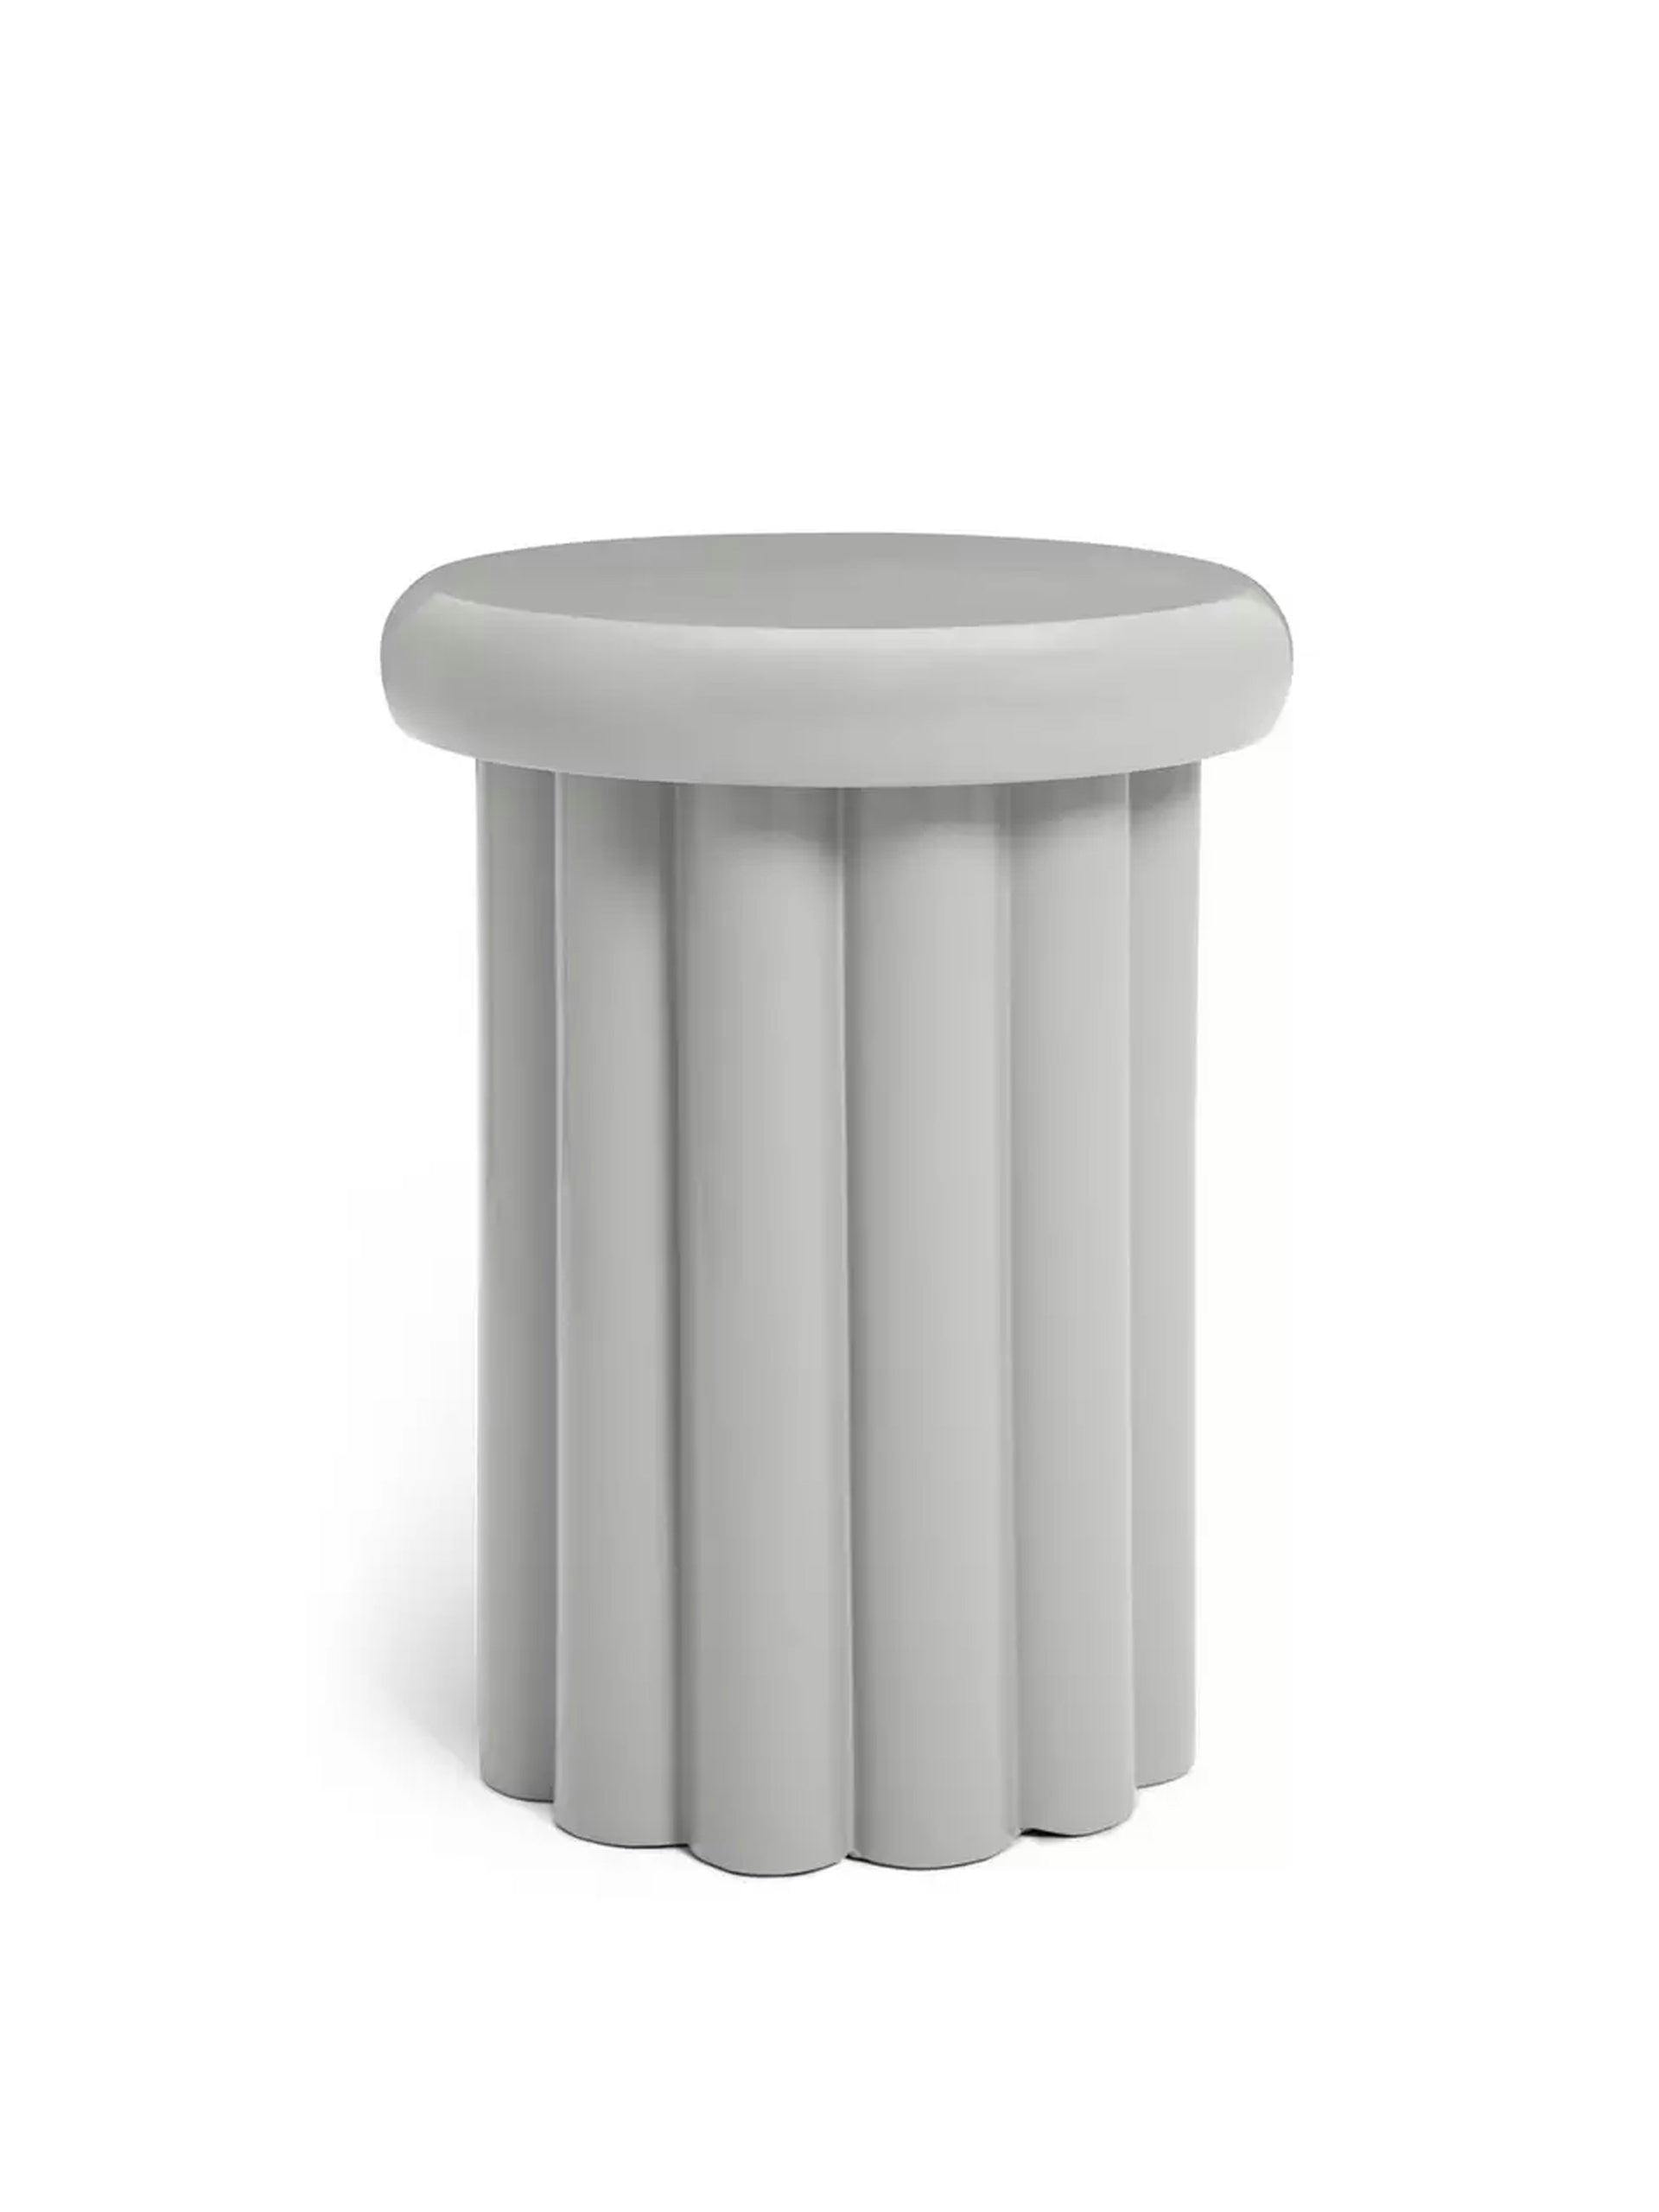 Coated metal ribbed side table